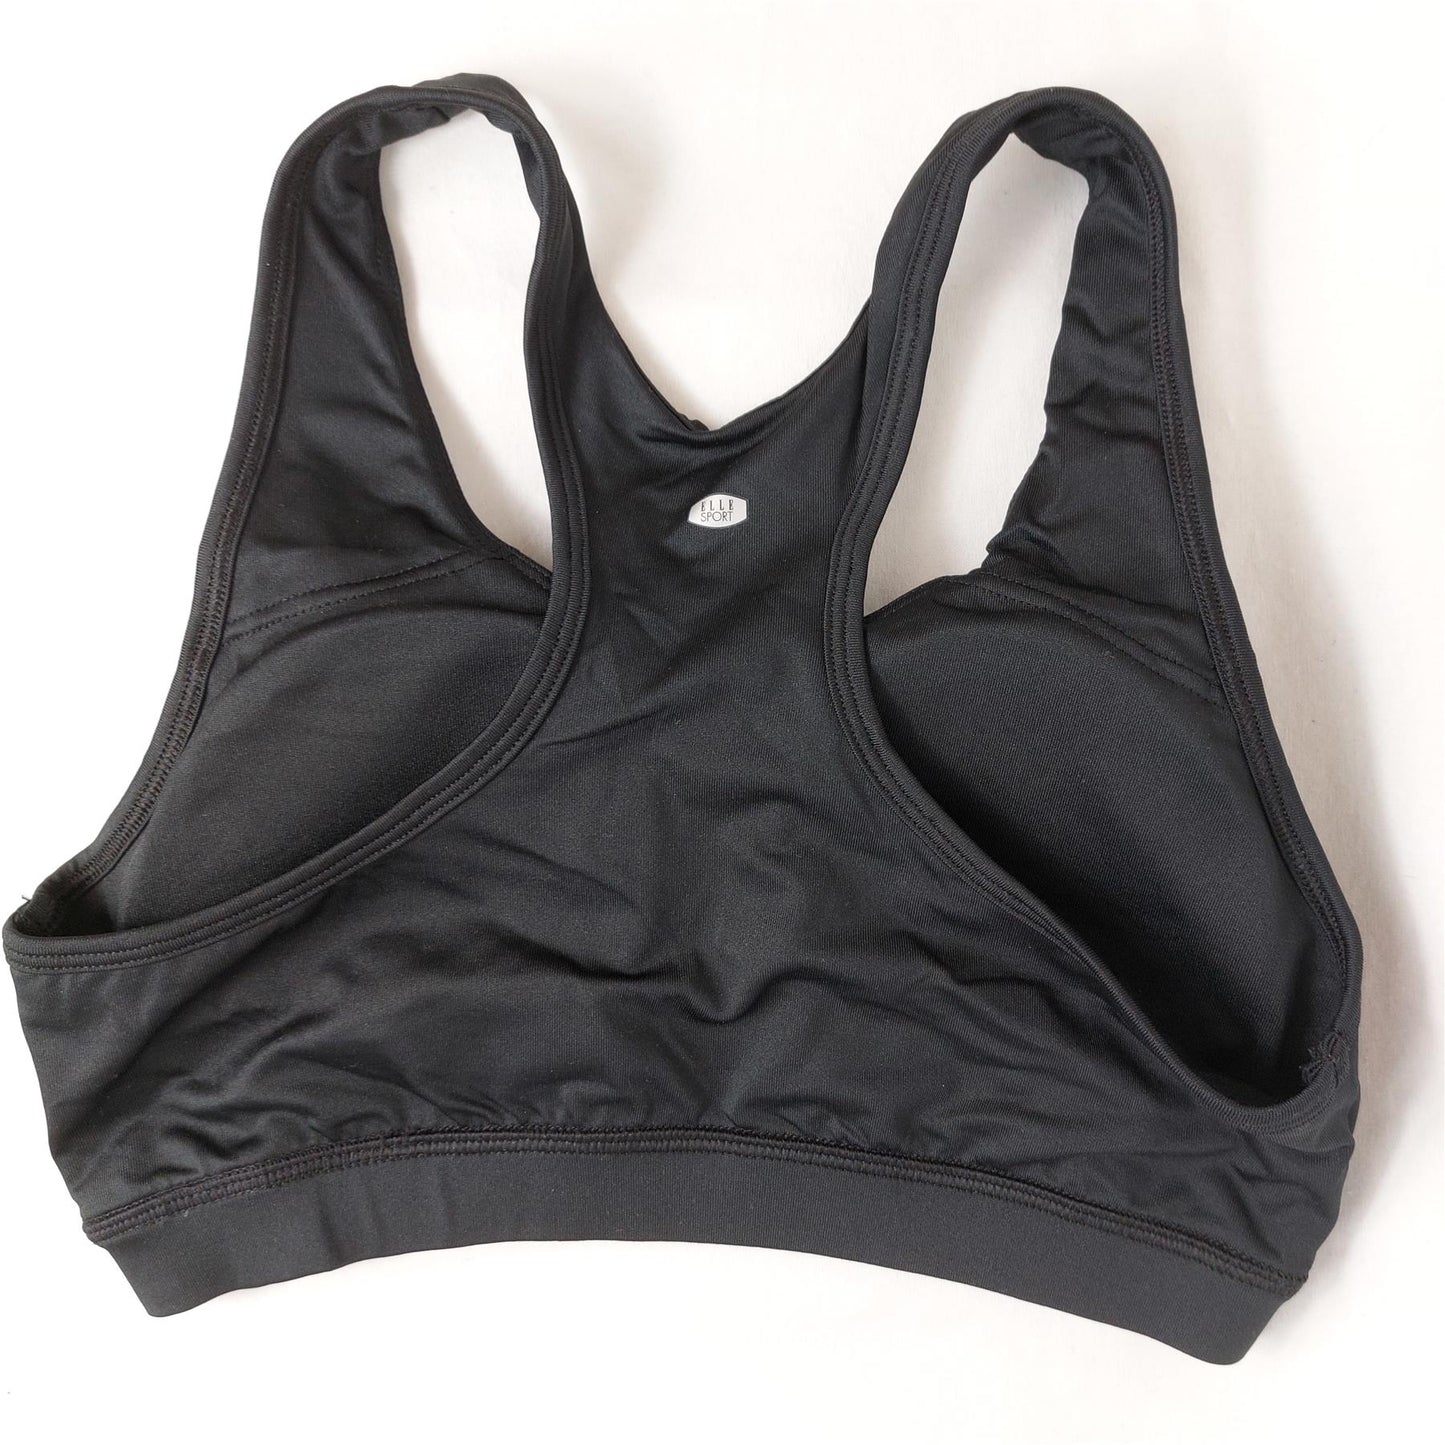 Elle Sport Sports Bra Medium Impact Non-Wired Removable Padding Workout Gym Top